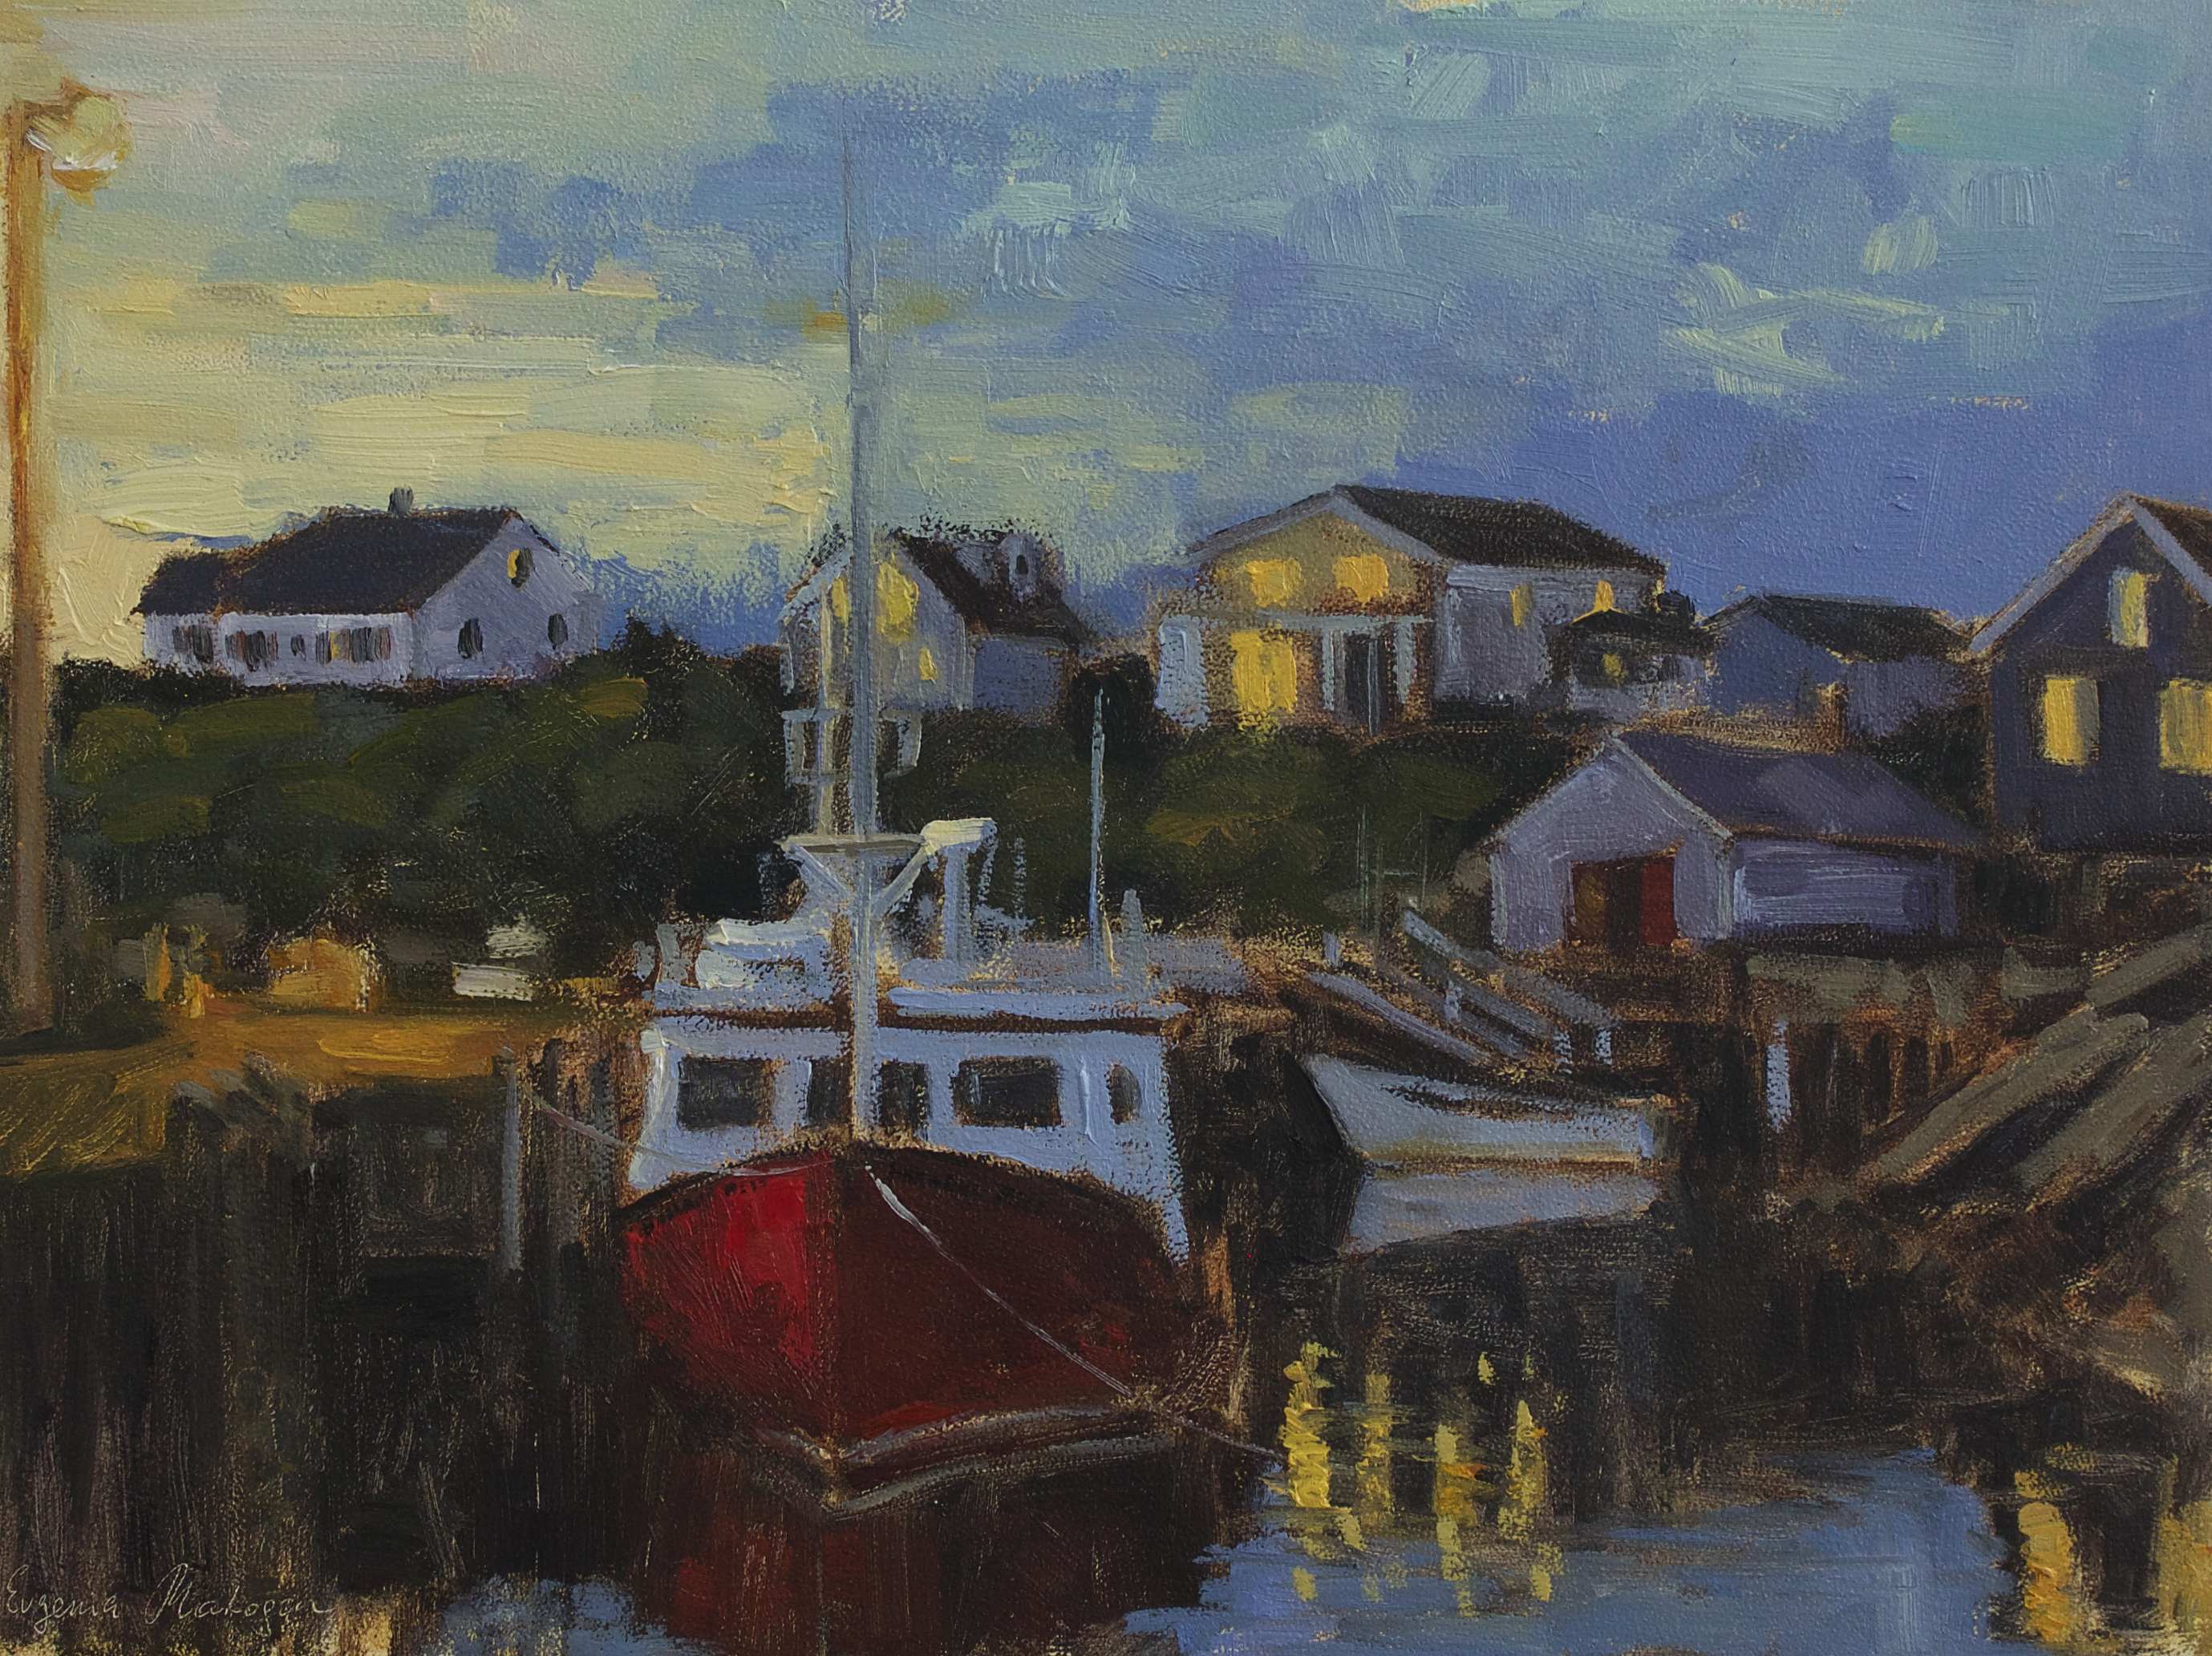 red boat in Peggy's cove at night with house with lights in window